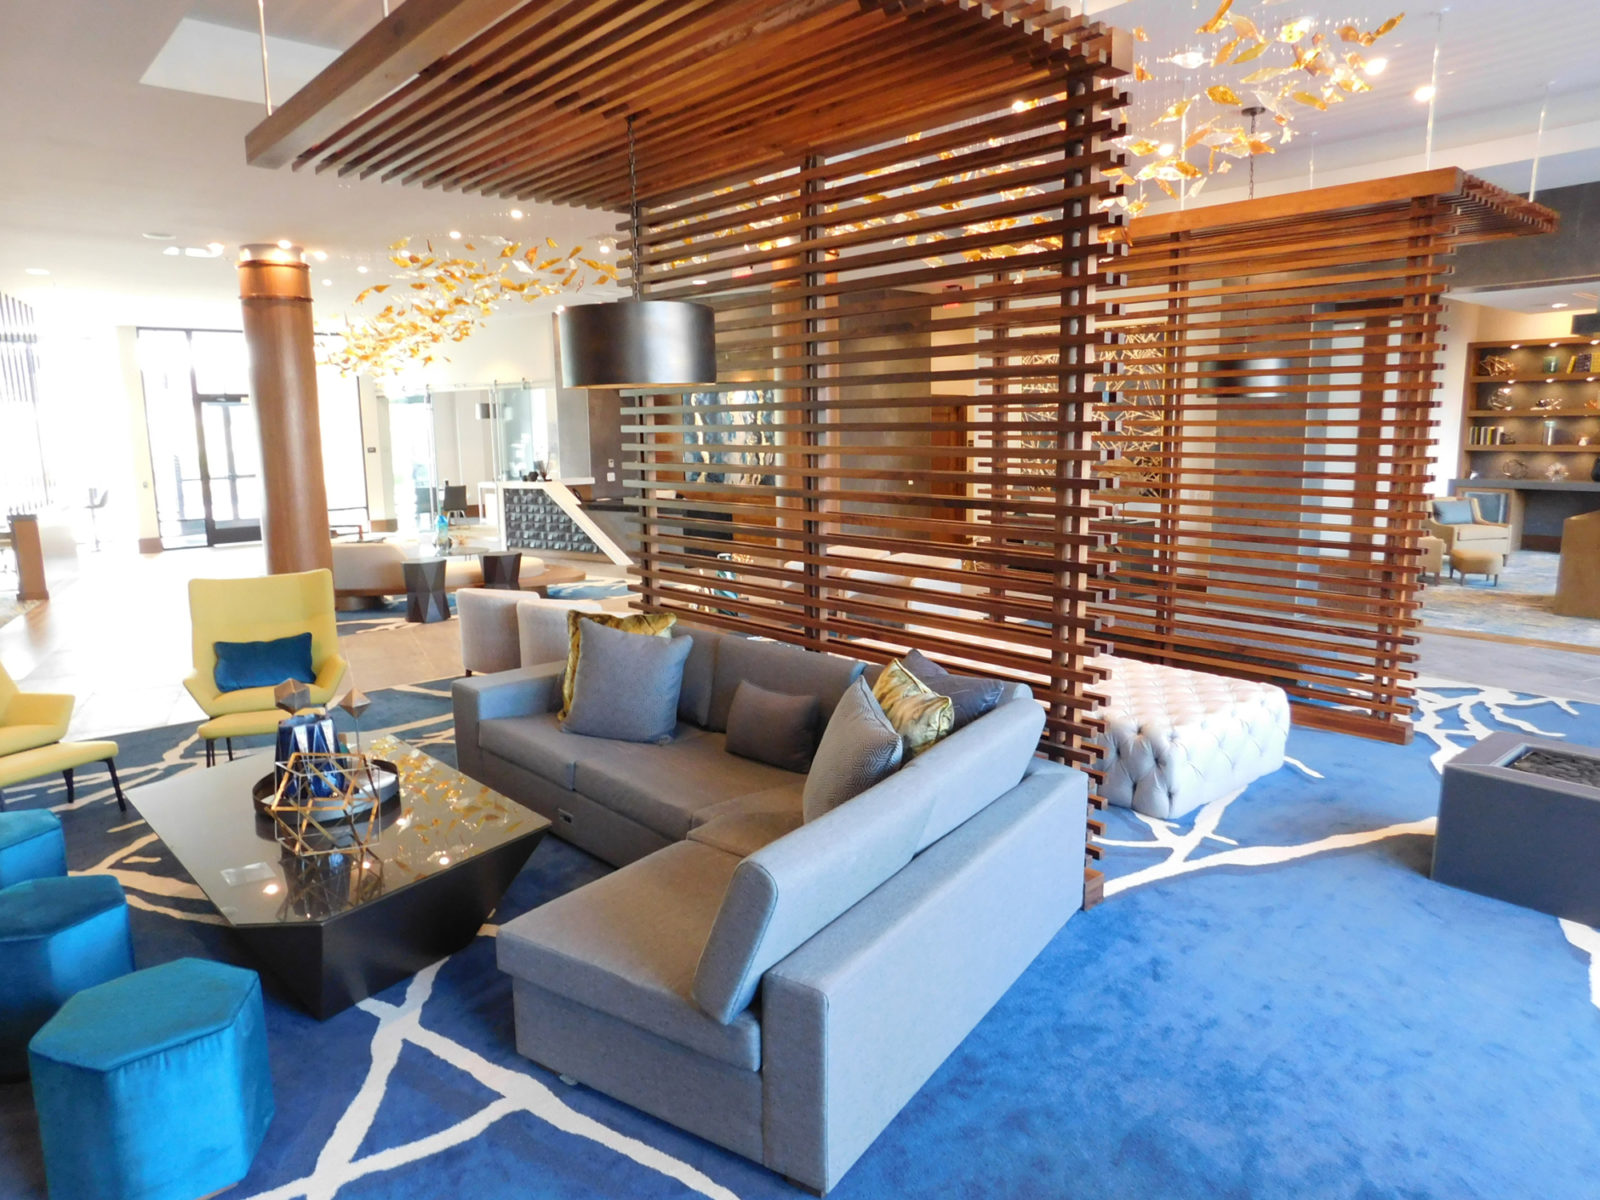 Common lobby space in building with a variety of lounge furniture throughout. Wooden slat wall and trellis are featured